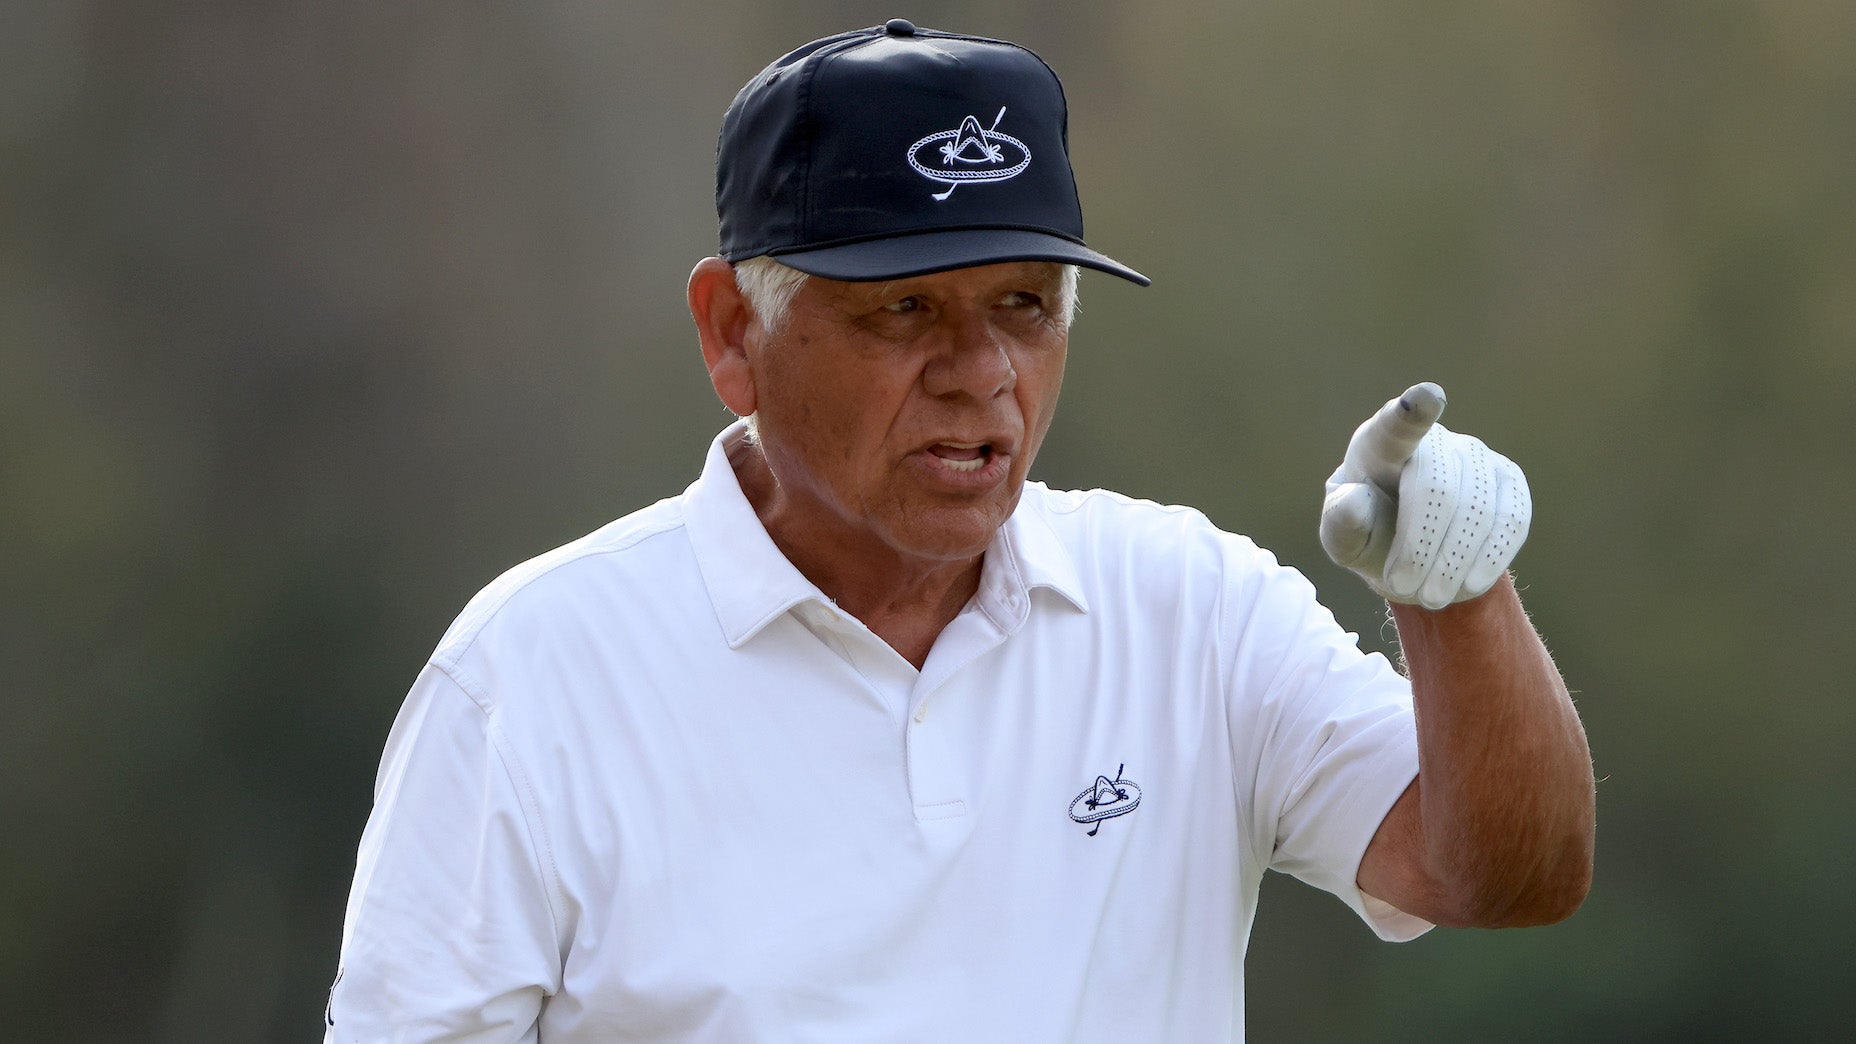 Lee Trevino 'declared war on slow play' in 1973. Would his 10 solutions  help now?